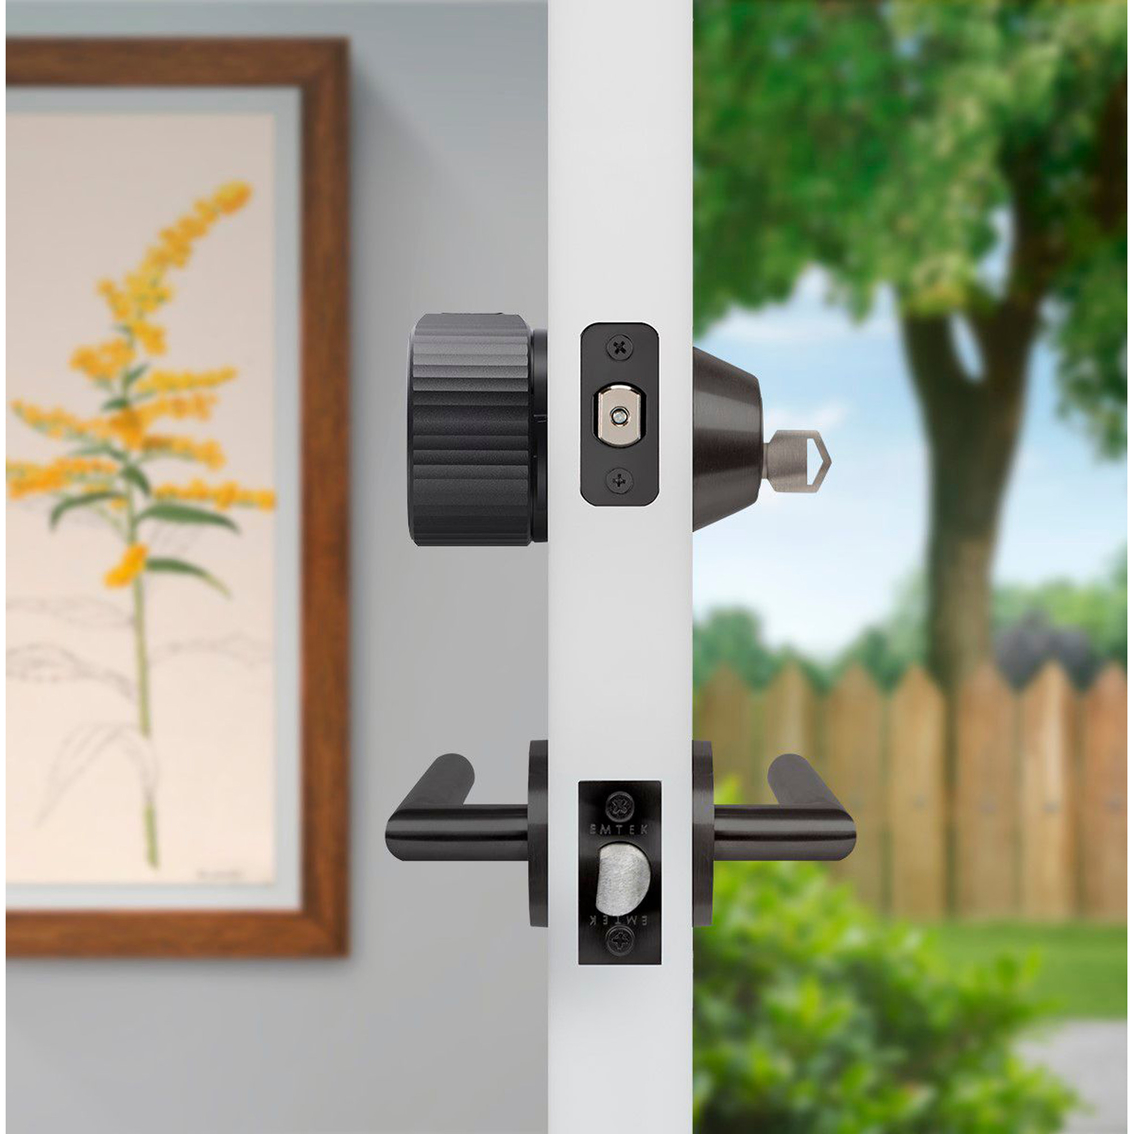 August Wi-Fi Smart Lock - Image 4 of 6